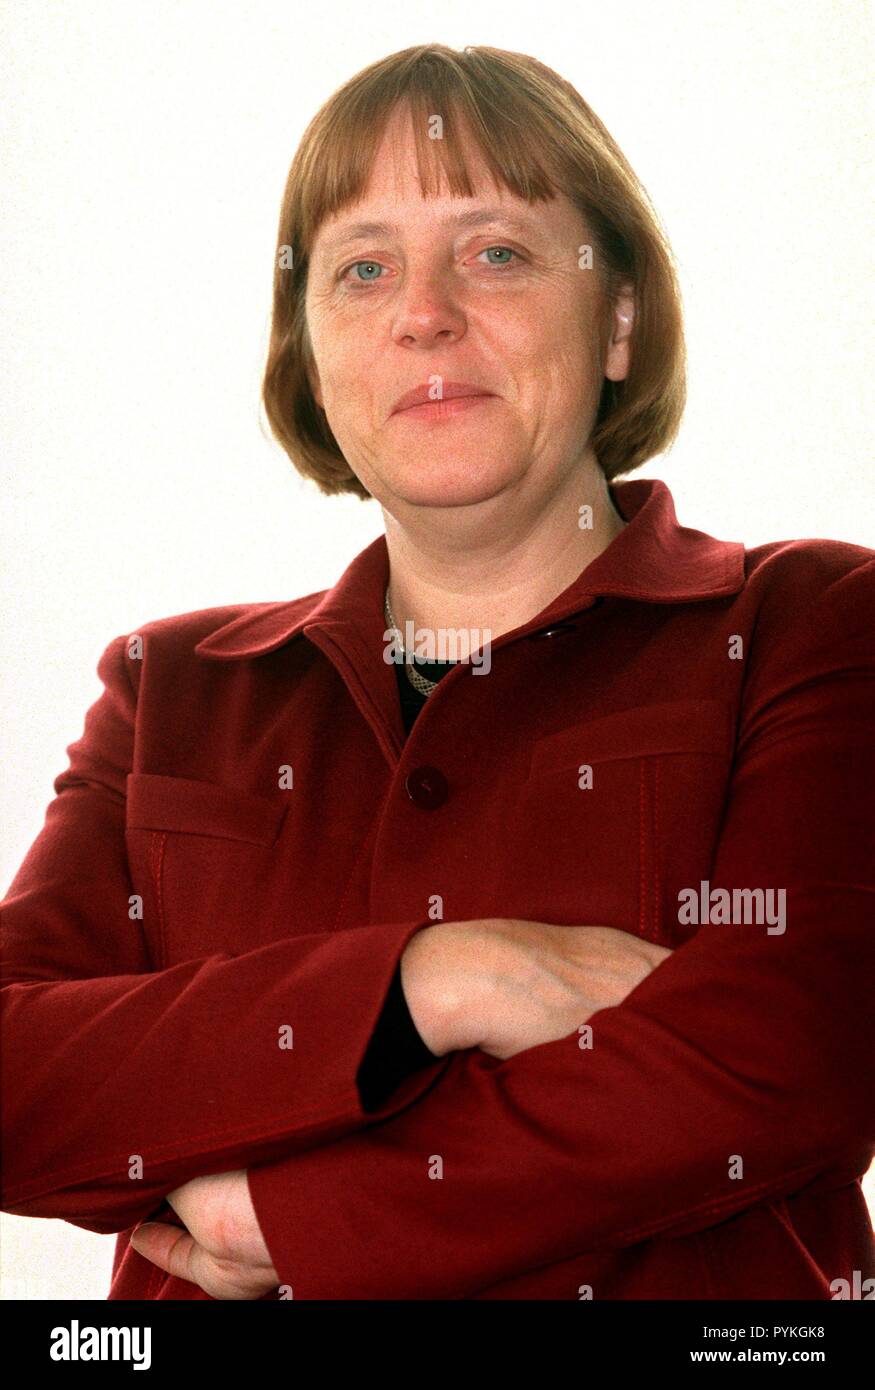 (dpa files) - Angela Merkel, chairman of the German Christian Democratic Party CDU, pictured in her office in Berlin, 8 February 2001. Merkel was to run for chancellor in the 2002 general election, but finally drew back in favor of the (male) candidate of the sister party CSU. | usage worldwide Stock Photo